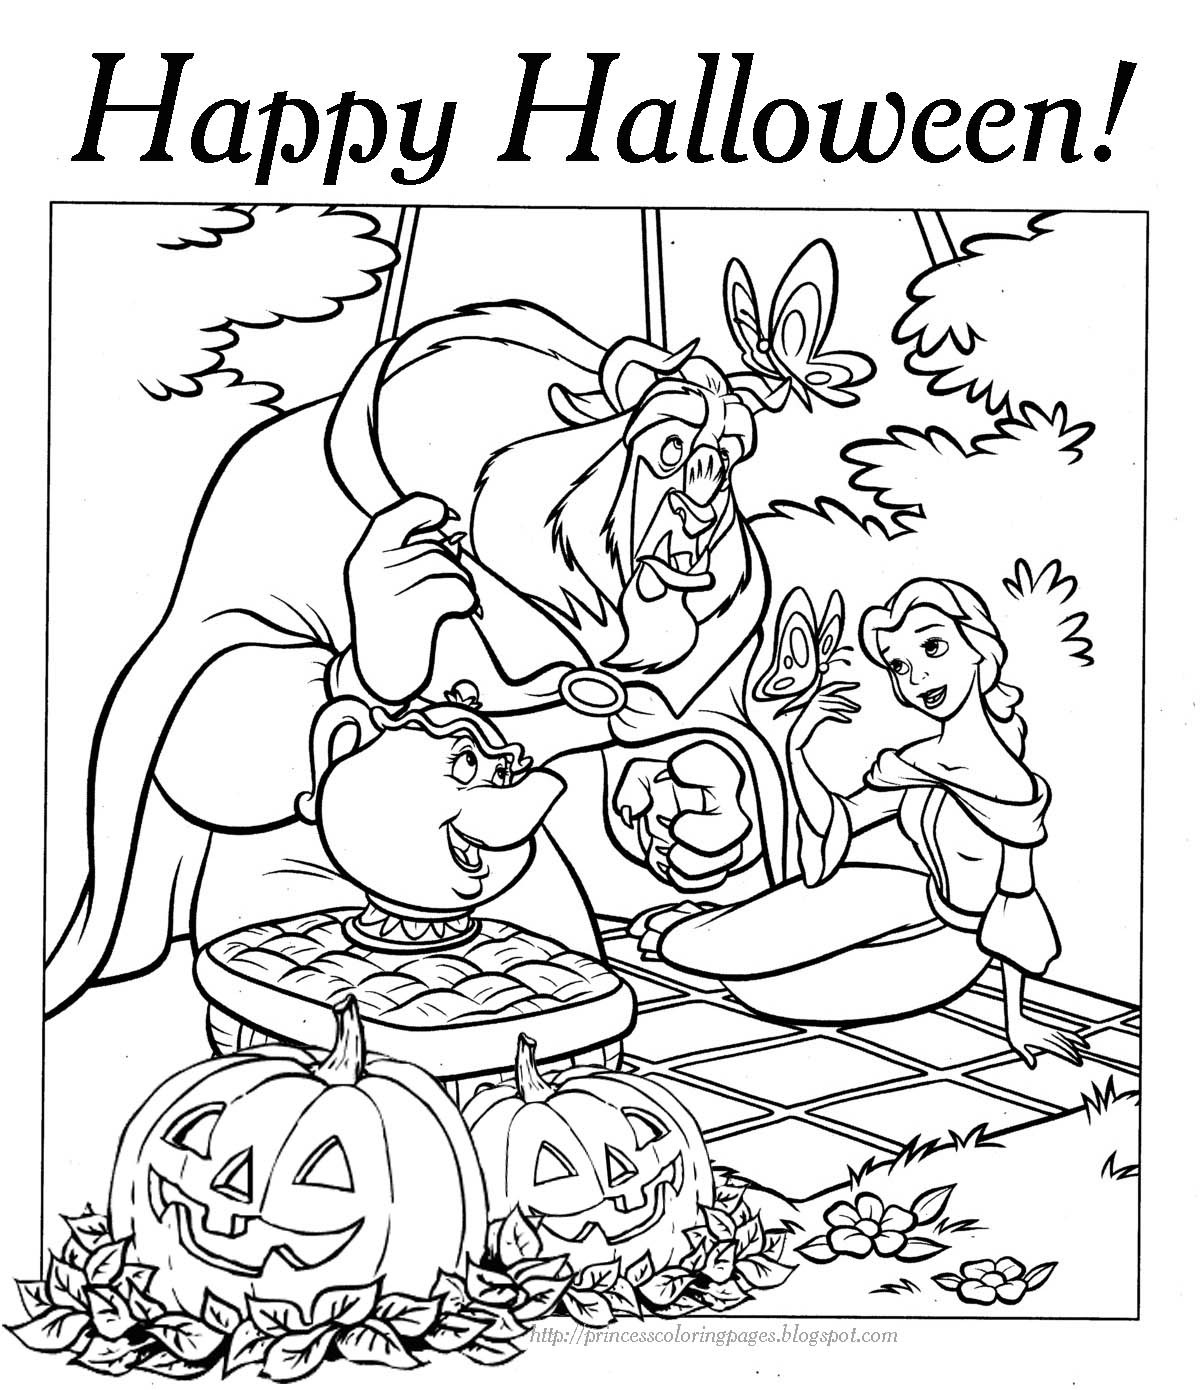 Printable Coloring Pages Halloween
 PRINCESS COLORING PAGES